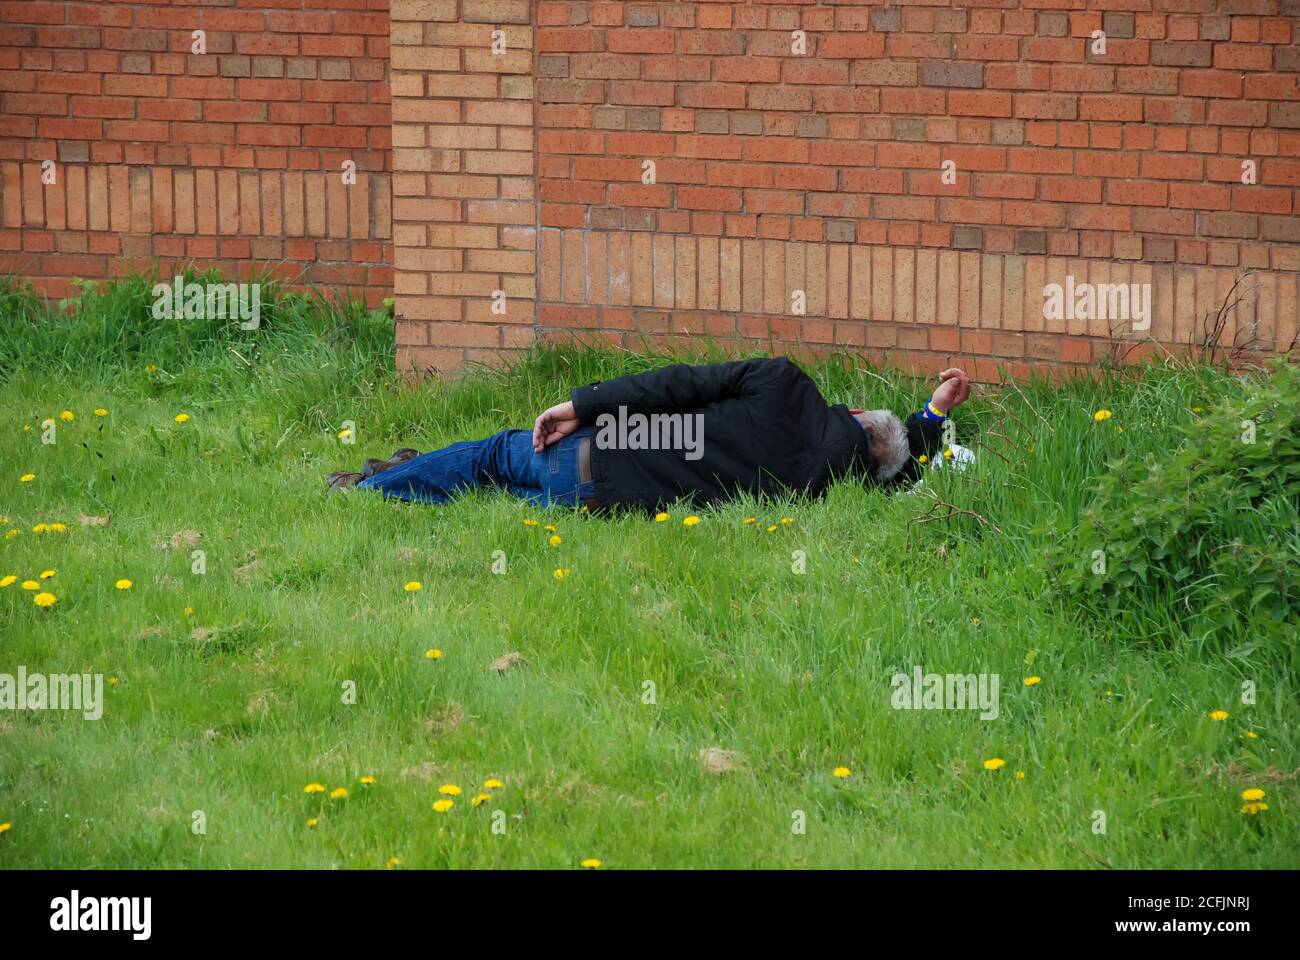 A drunk passed out on a patch of grass in Liverpool, UK Stock Photo